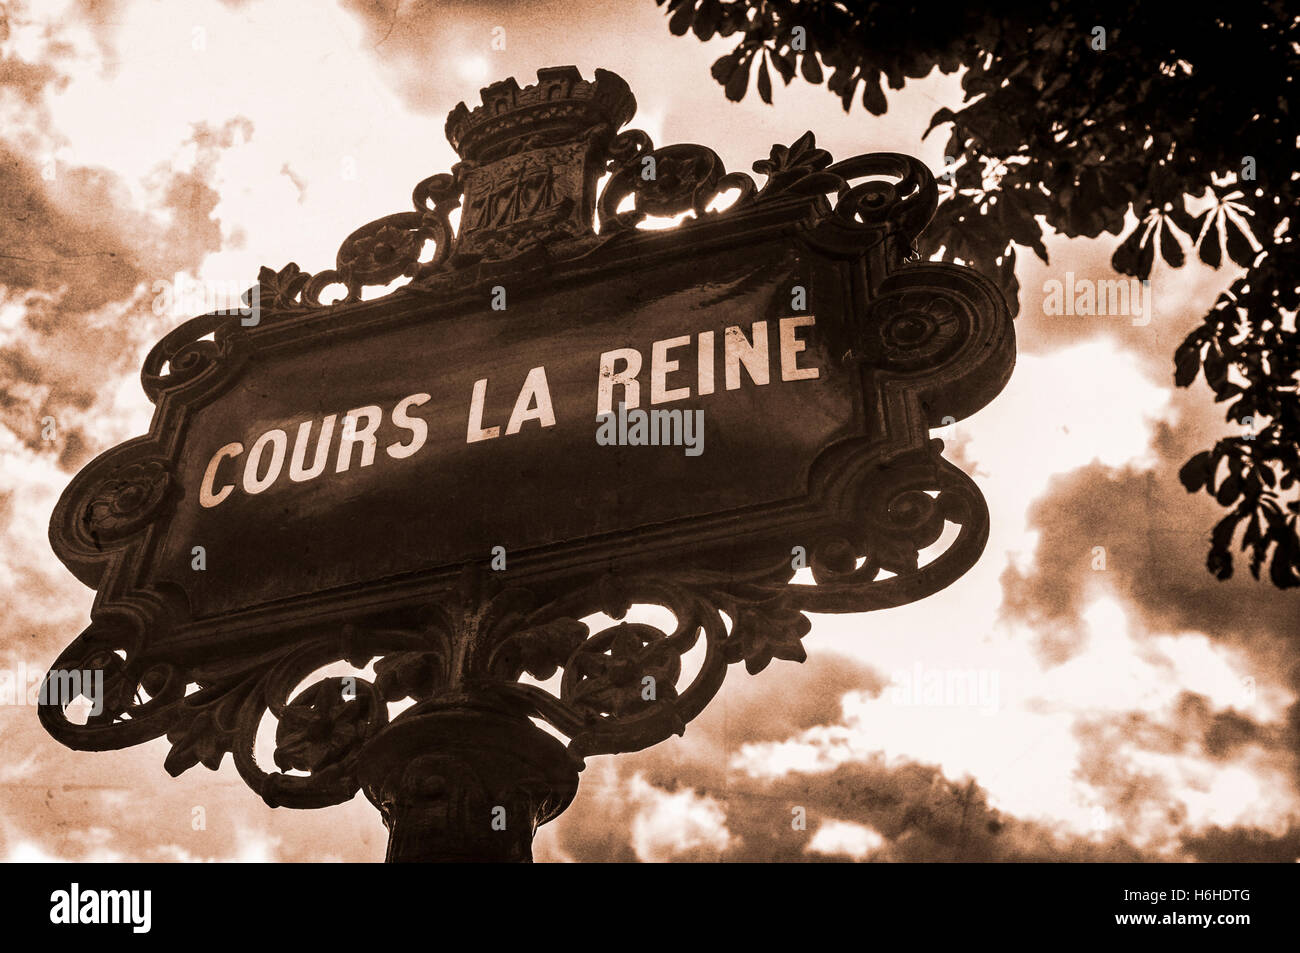 An ornate, sepia toned, vintage street sign in central Paris, France, with a grainy and distressed look. Stock Photo